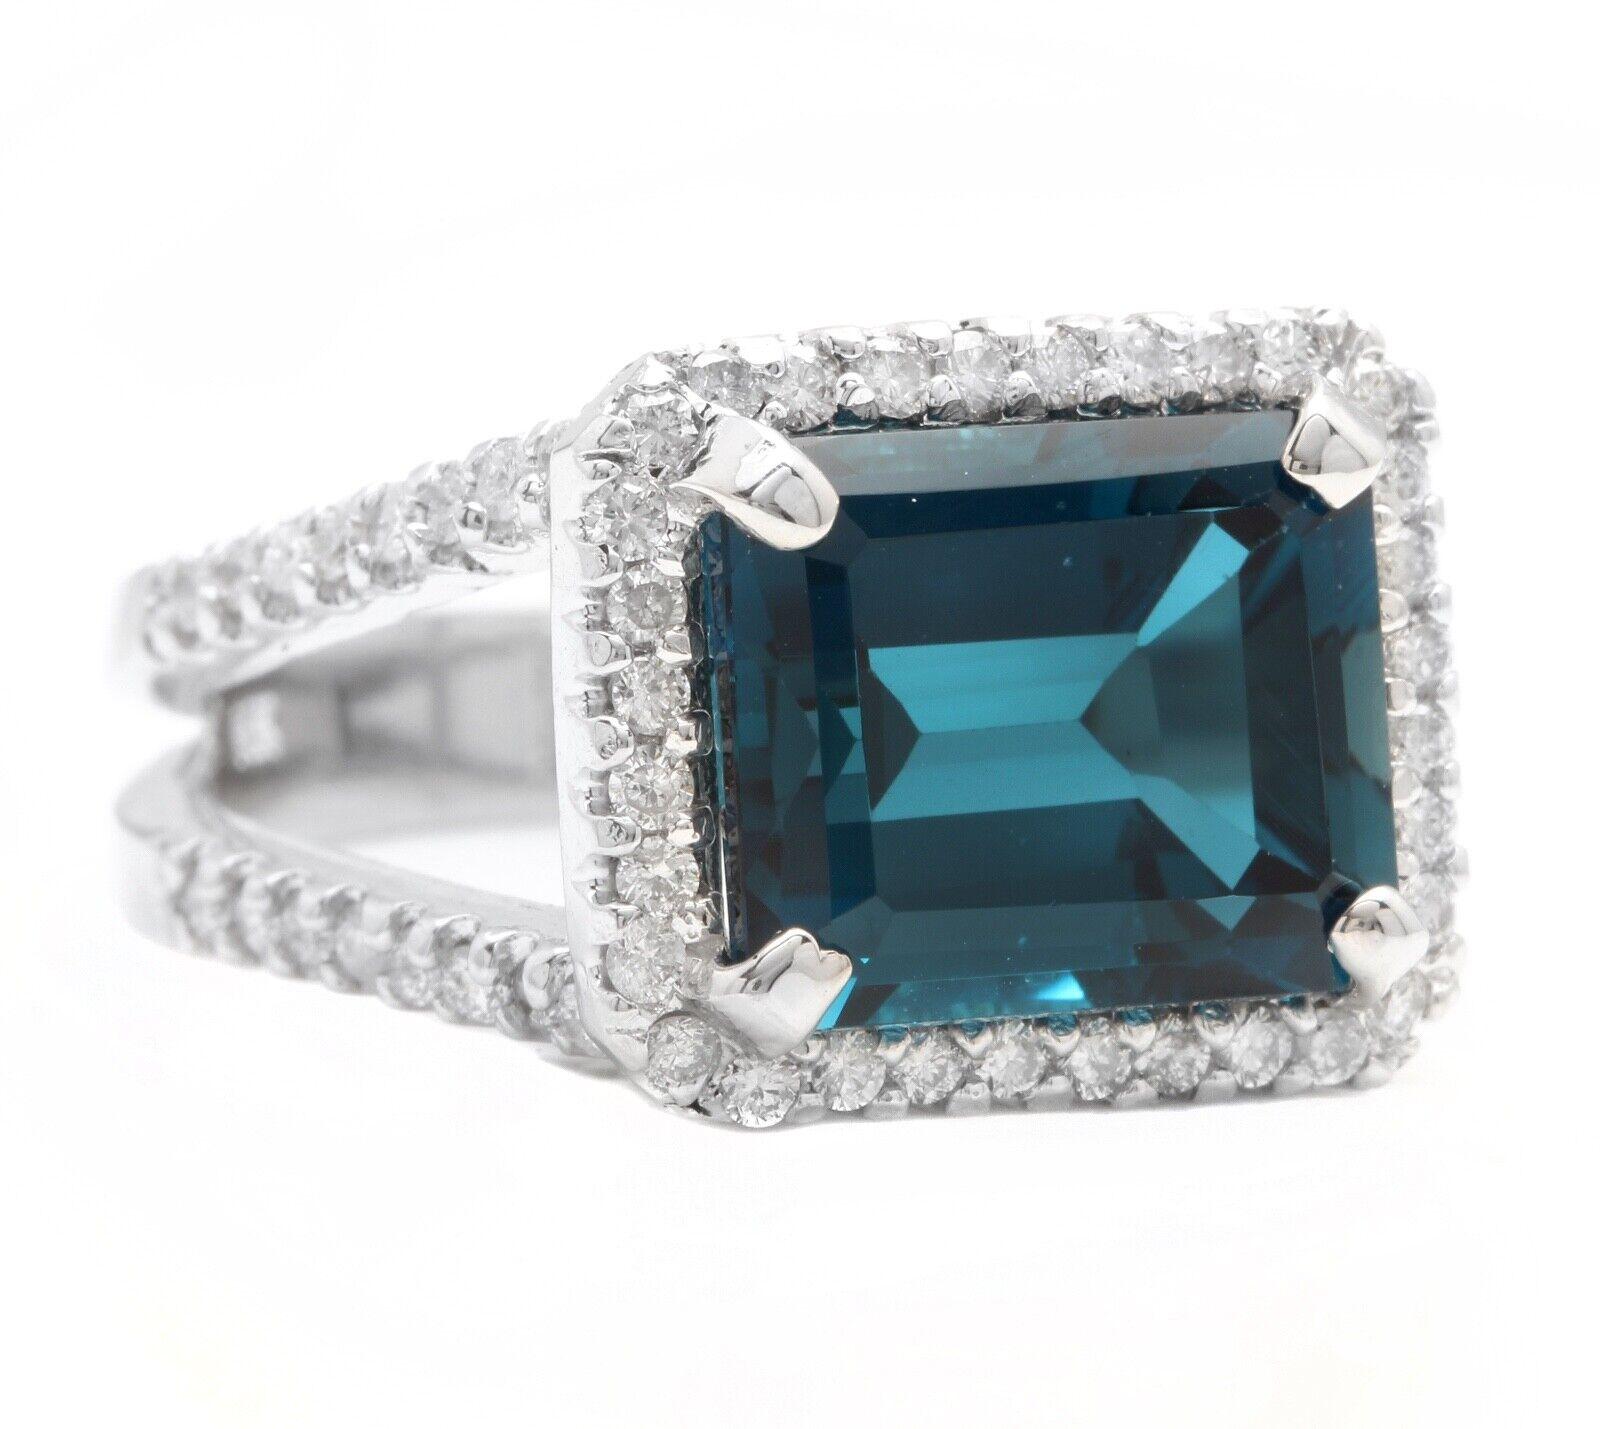 7.35 Carats Impressive Natural London Blue Topaz and Diamond 14K White Gold Ring

Suggested Replacement Value: Approx. $6,000.00

Total Natural London Blue Topaz Weight is: Approx. 6.50 Carats

Topaz Measures: Approx. 12.00 x 10.00mm

Natural Round